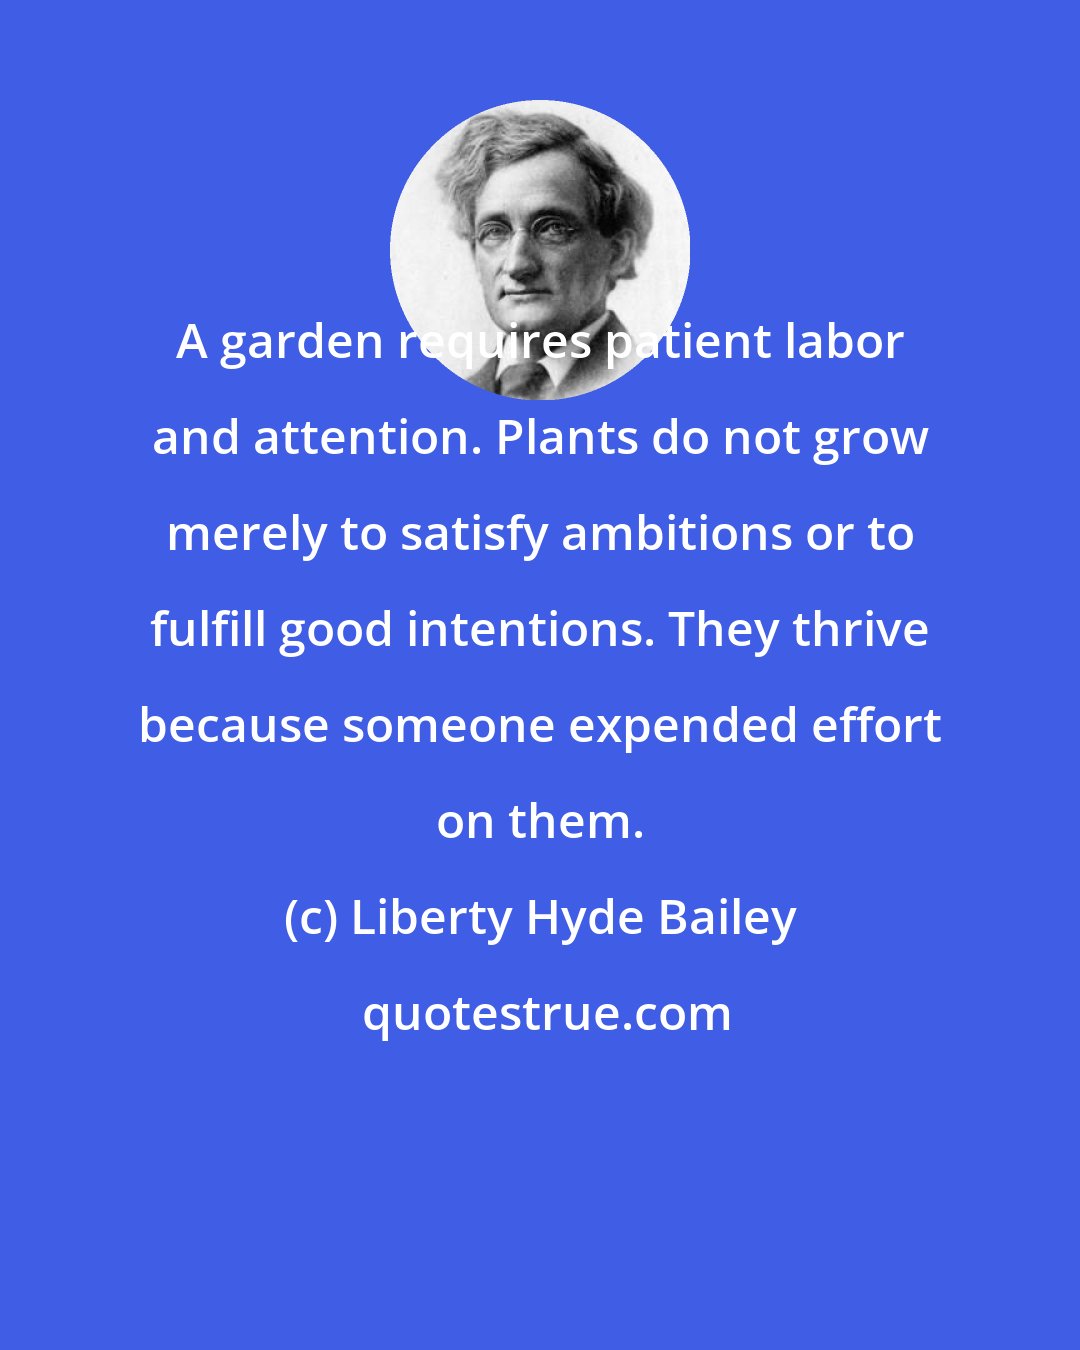 Liberty Hyde Bailey: A garden requires patient labor and attention. Plants do not grow merely to satisfy ambitions or to fulfill good intentions. They thrive because someone expended effort on them.